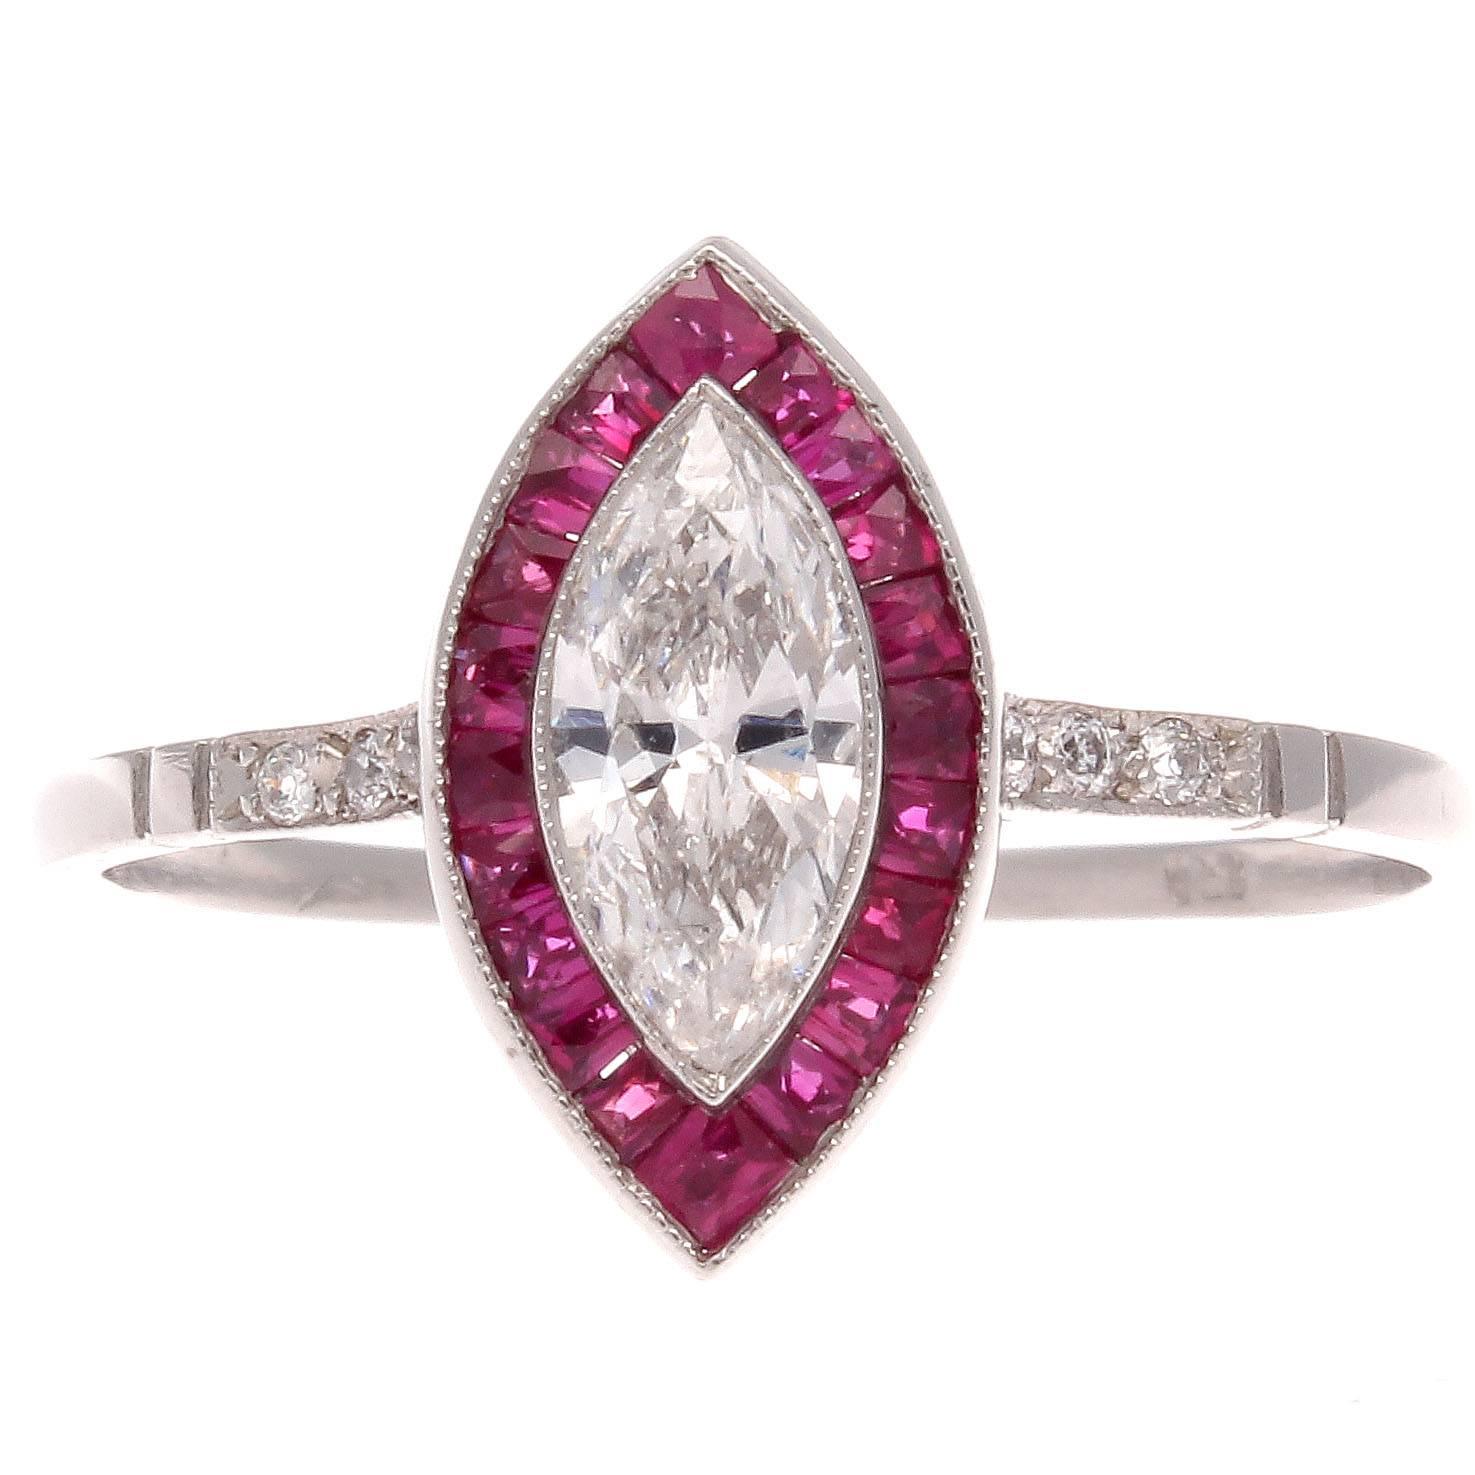 A colorful rendition on the classic halo ring. Featuring a 0.46 carat marquise cut diamond surrounded by a vibrant halo of red rubies that flow into a cascade of perfectly matching white diamonds in the platinum band.

Ring size 6 and may be resized.